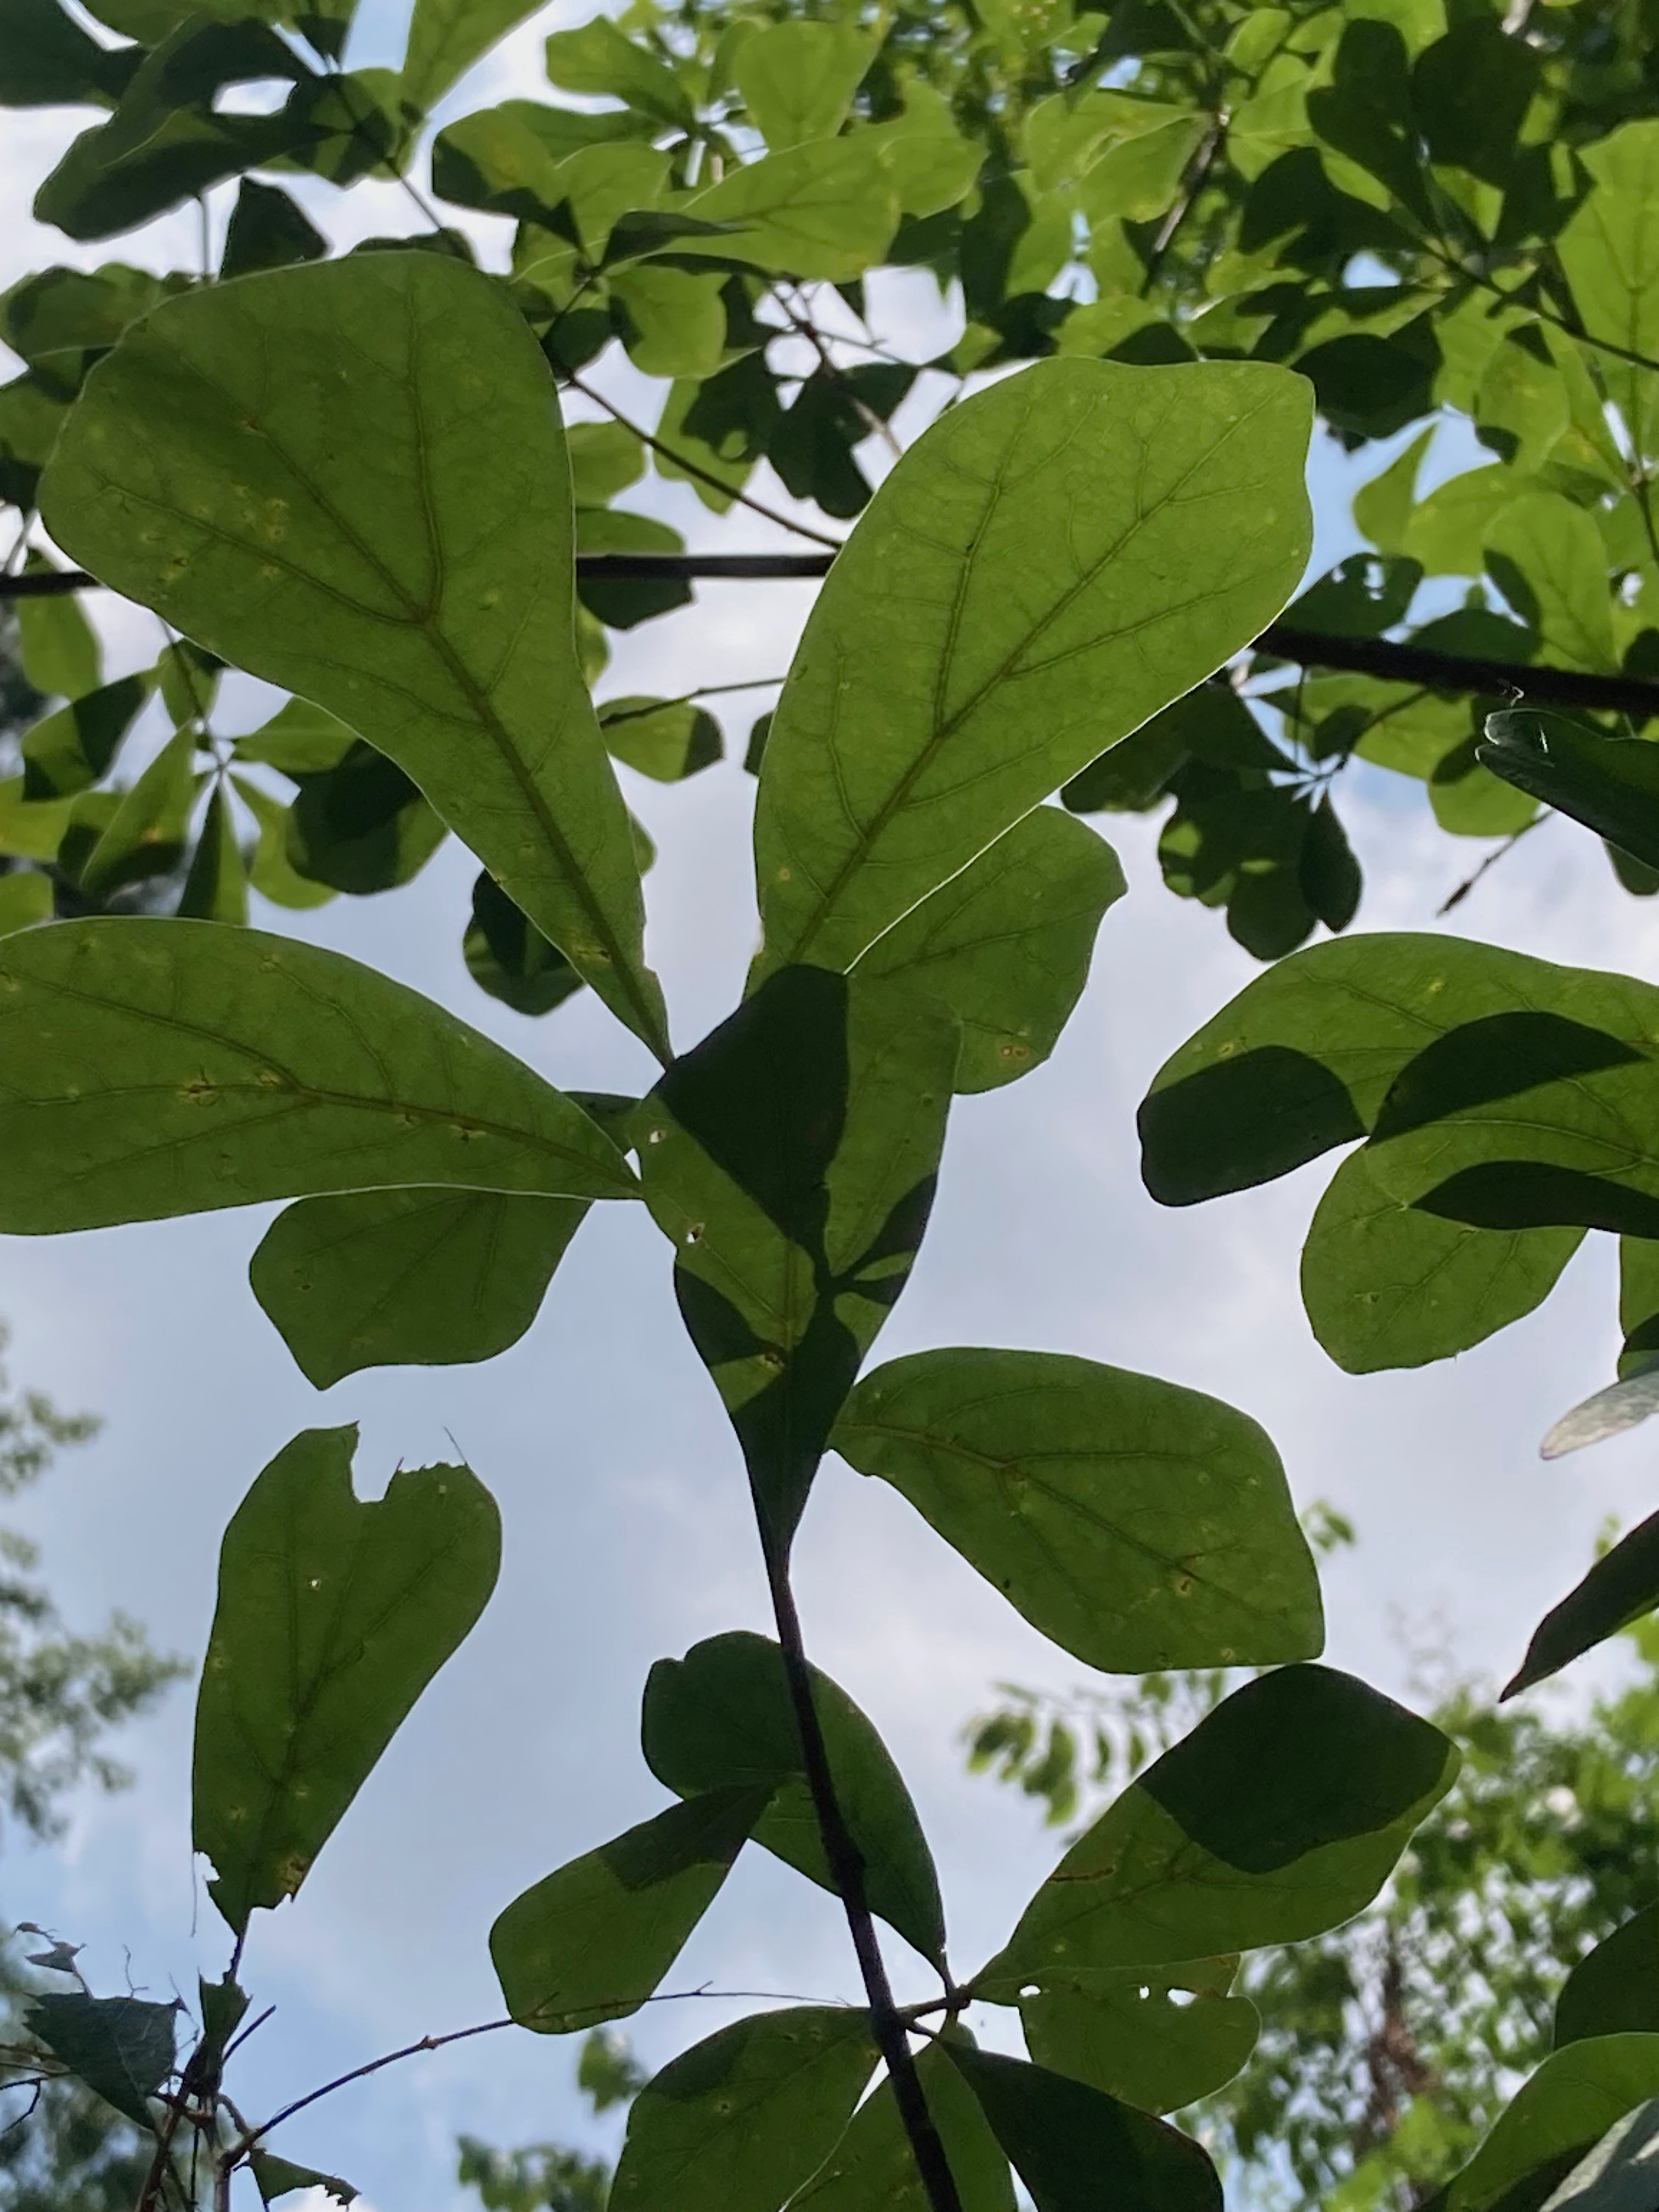 The Scientific Name is Quercus nigra. You will likely hear them called Water Oak, Paddle Oak. This picture shows the Most leaves are paddle-shaped with the distal end rounded. of Quercus nigra